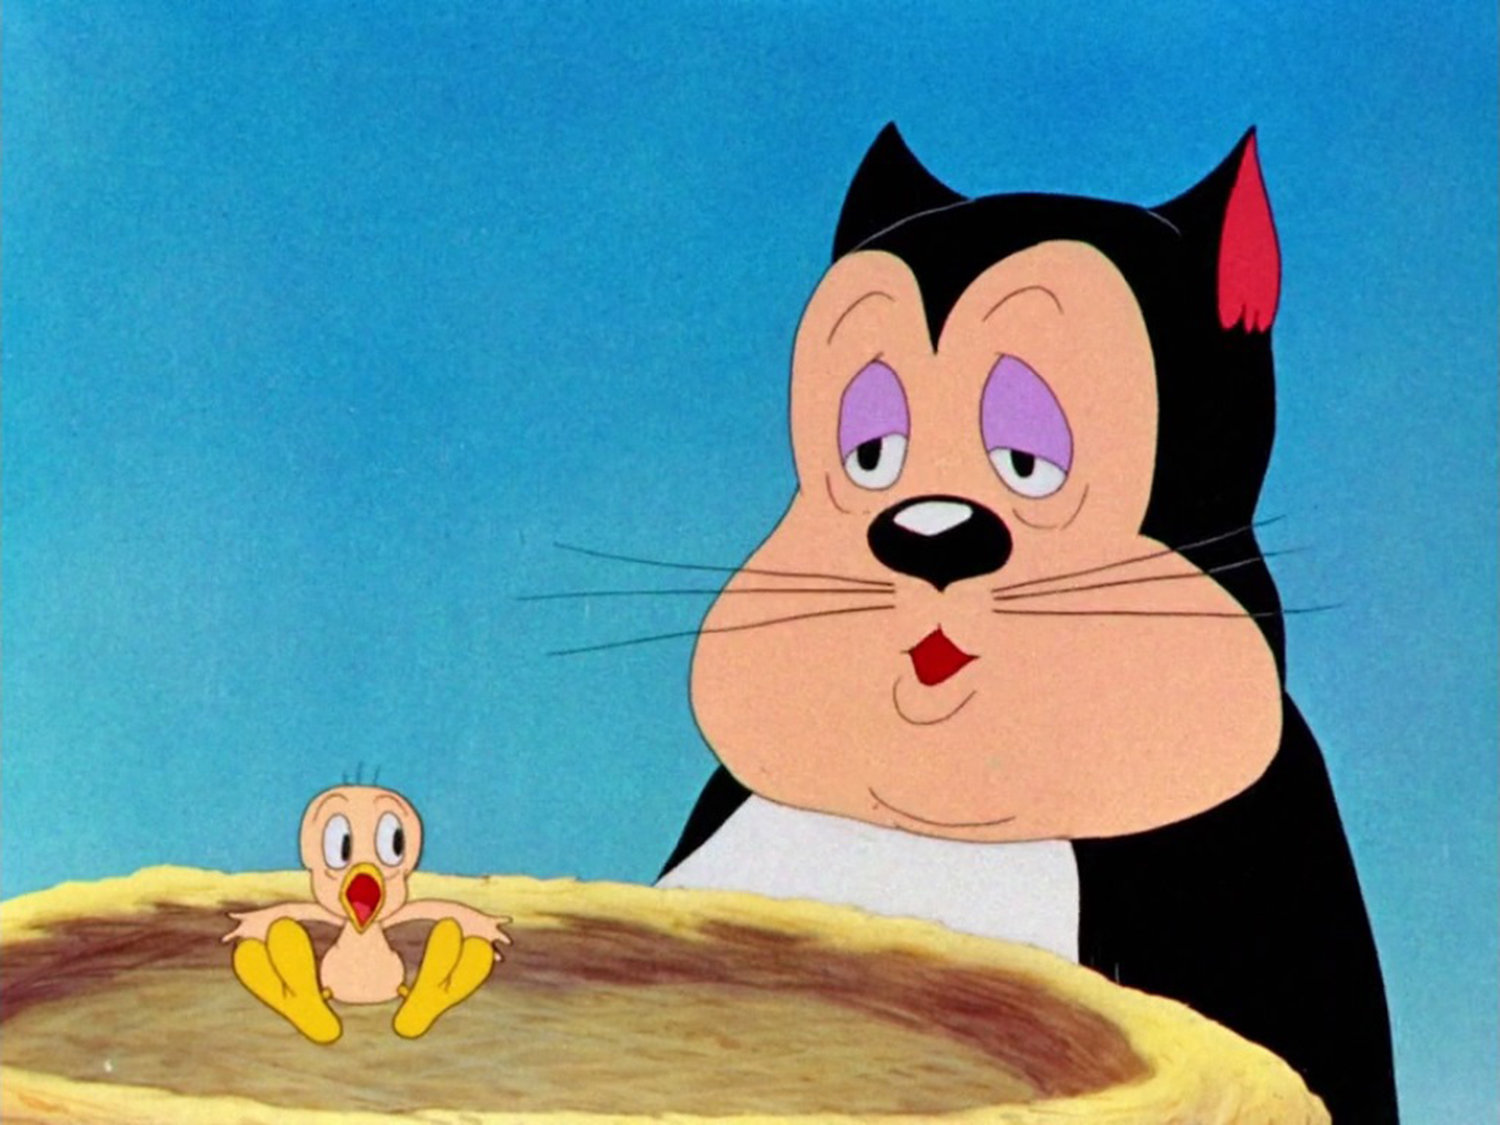 TWEETY BIRD'S START — A still image from "A Tale of Two Kitties," the first cartoon ever to include Tweety. At this point, his character did not yet have a name.